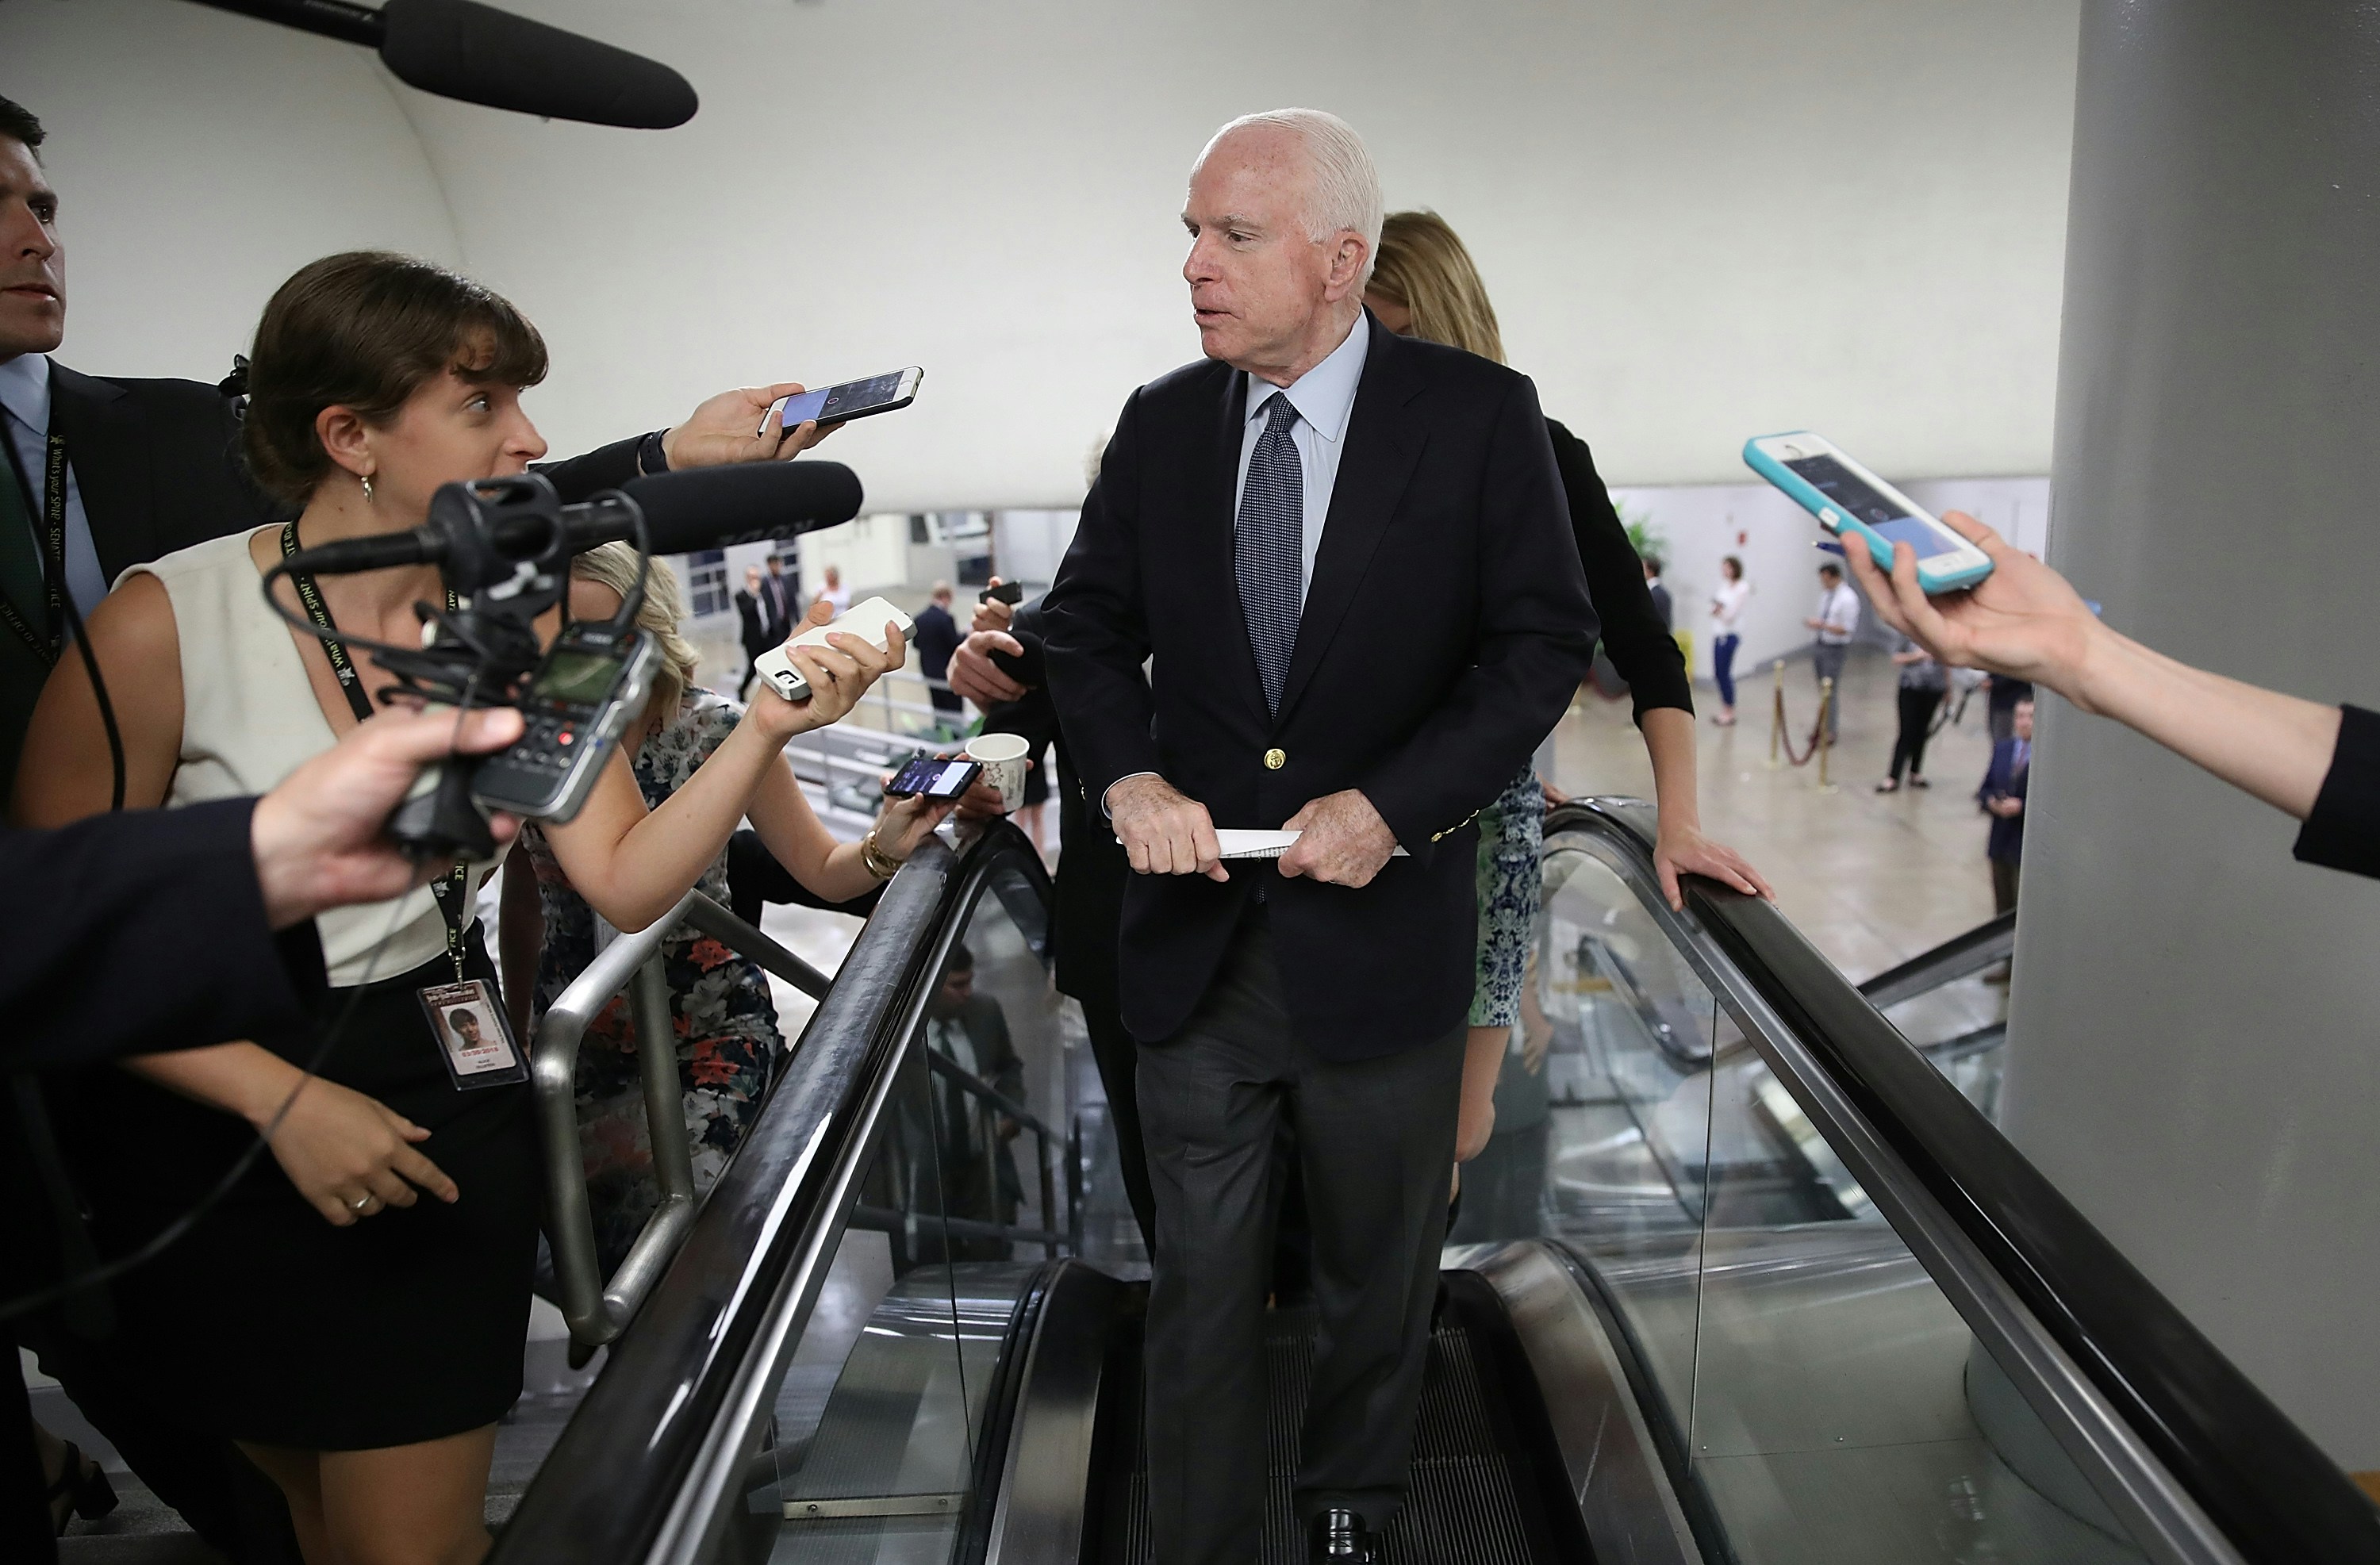 WASHINGTON, DC - JULY 13:  Sen. John McCain (R-AZ) answers questions from reporters as he walks to a meeting of Republican senators where a new version of their healthcare bill was scheduled to be released at the U.S. Capitol July 13, 2017 in Washington, DC. The latest version of the proposed bill aims to repeal and replace the Affordable Care Act, also knows as Obamacare.  (Photo by Win McNamee/Getty Images)